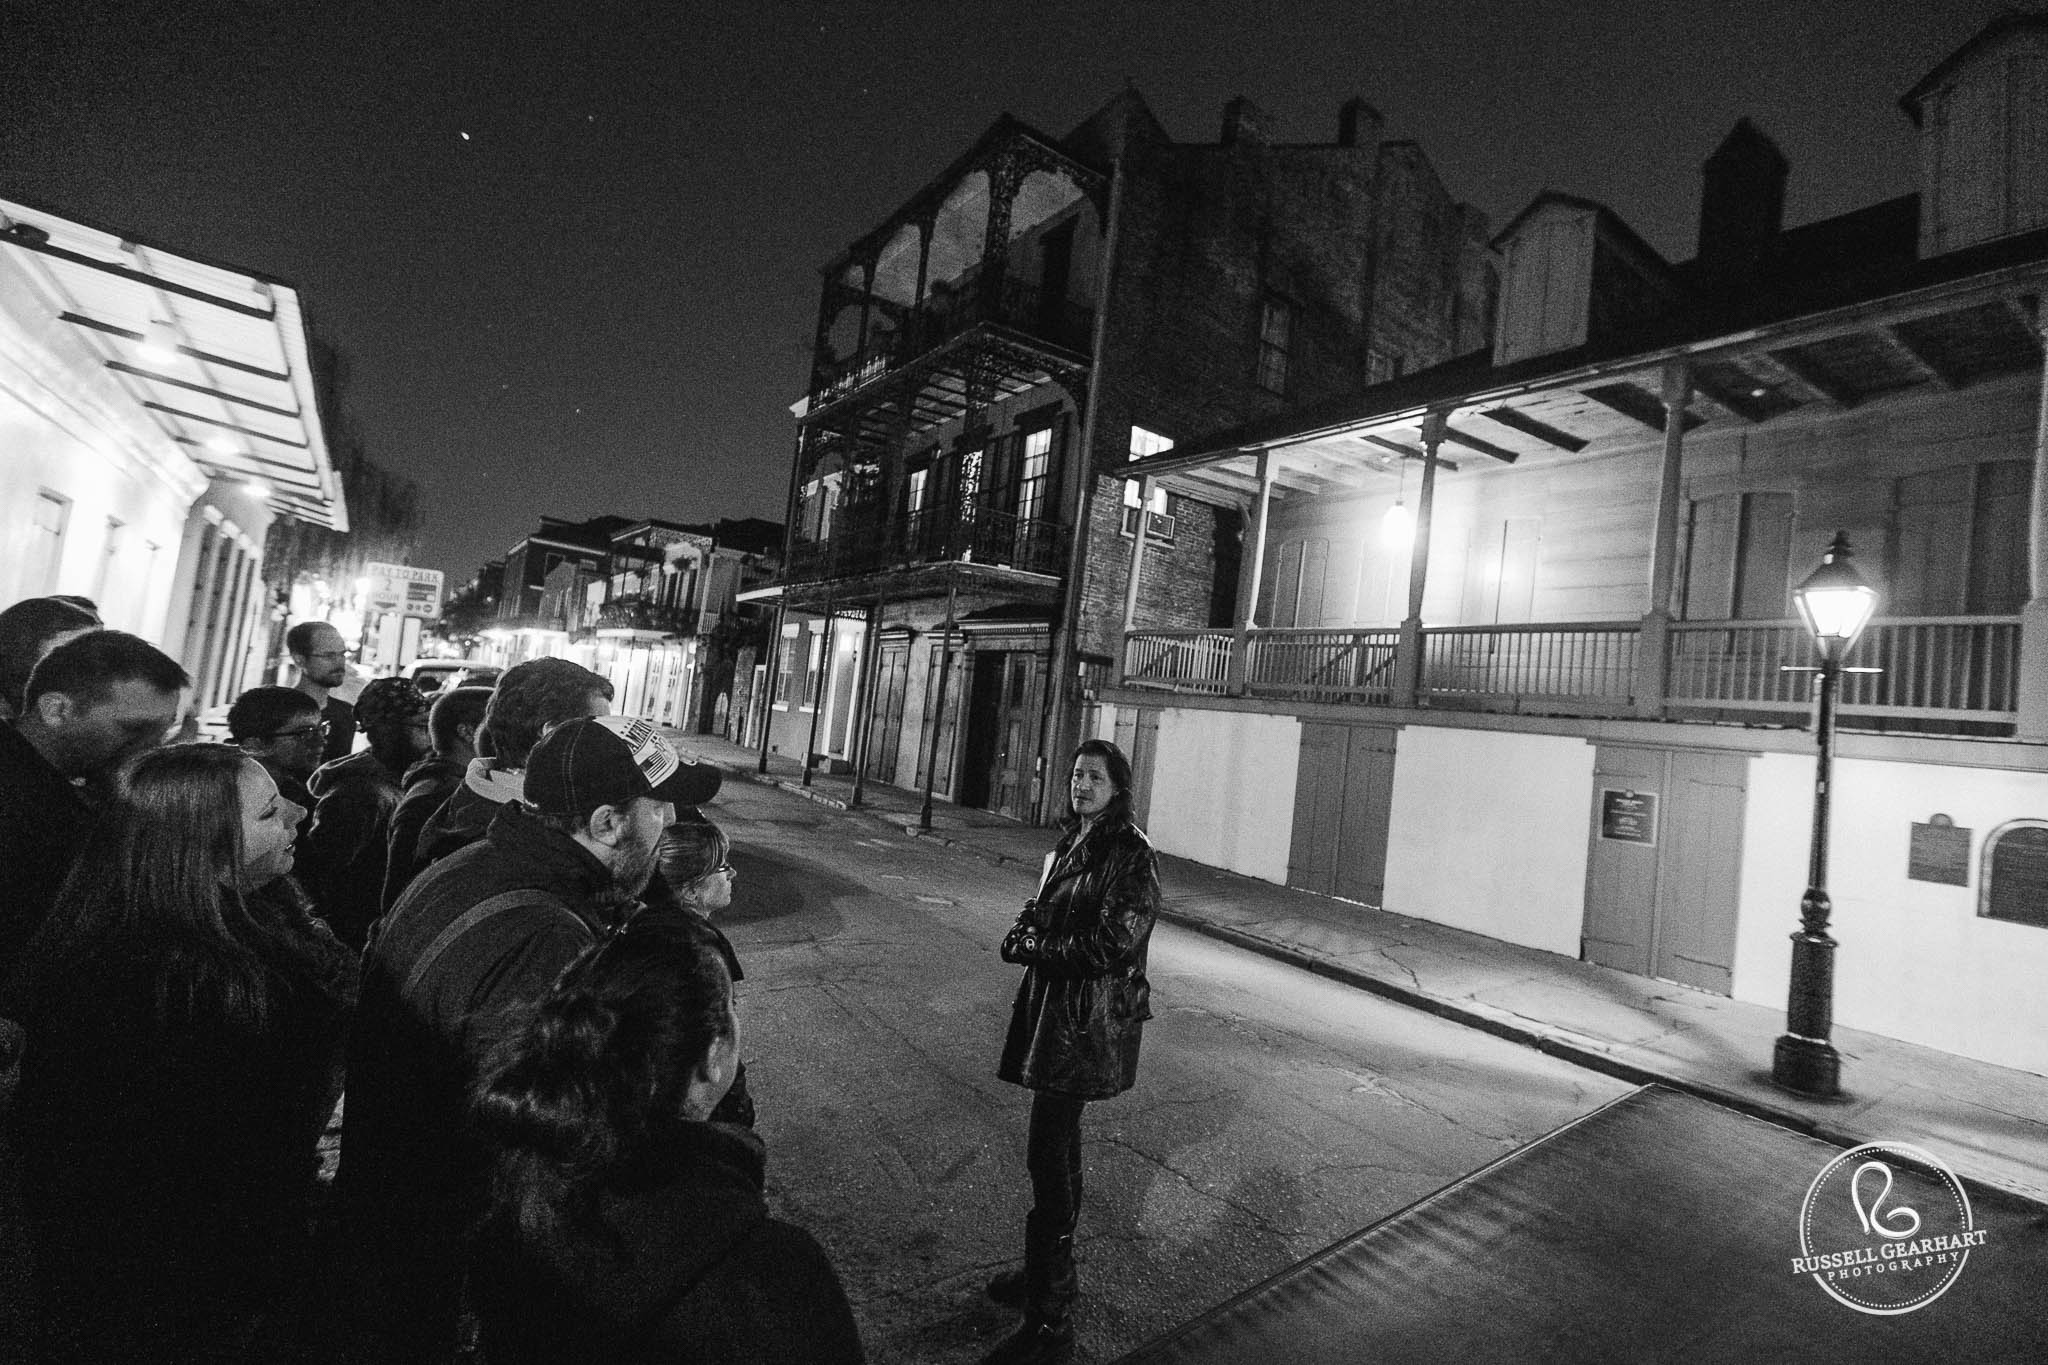 New Orleans is one of the most haunted cities in the country, so of course, we went on a ghost tour!